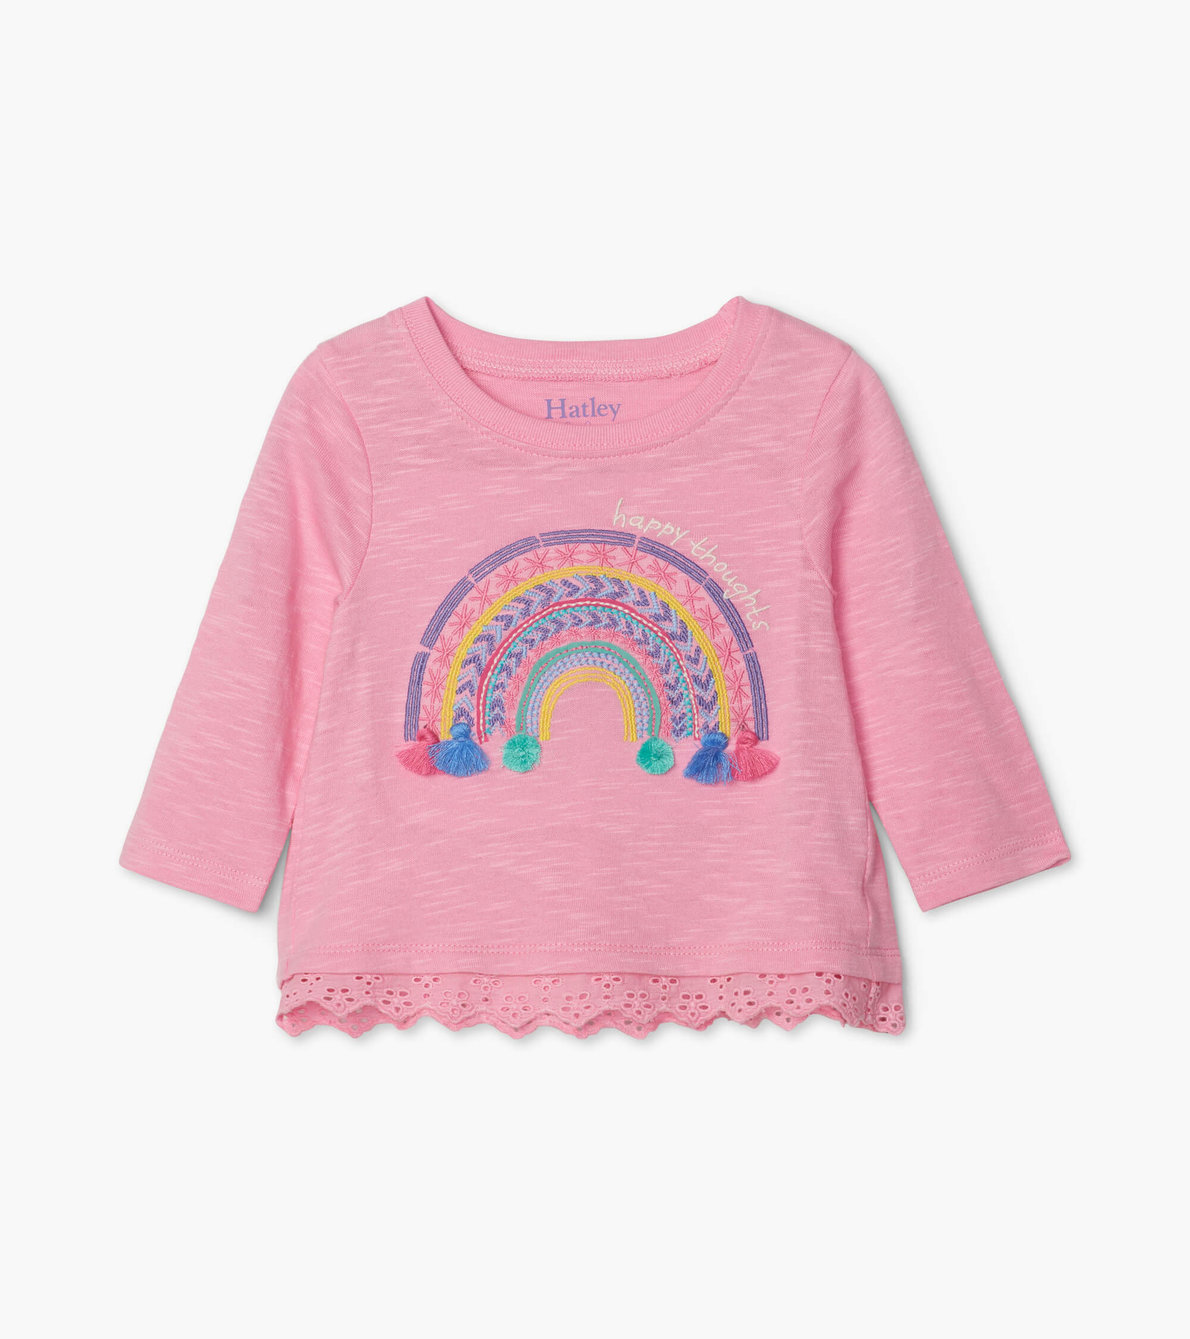 View larger image of Delightful Rainbow Long Sleeve Baby Tee